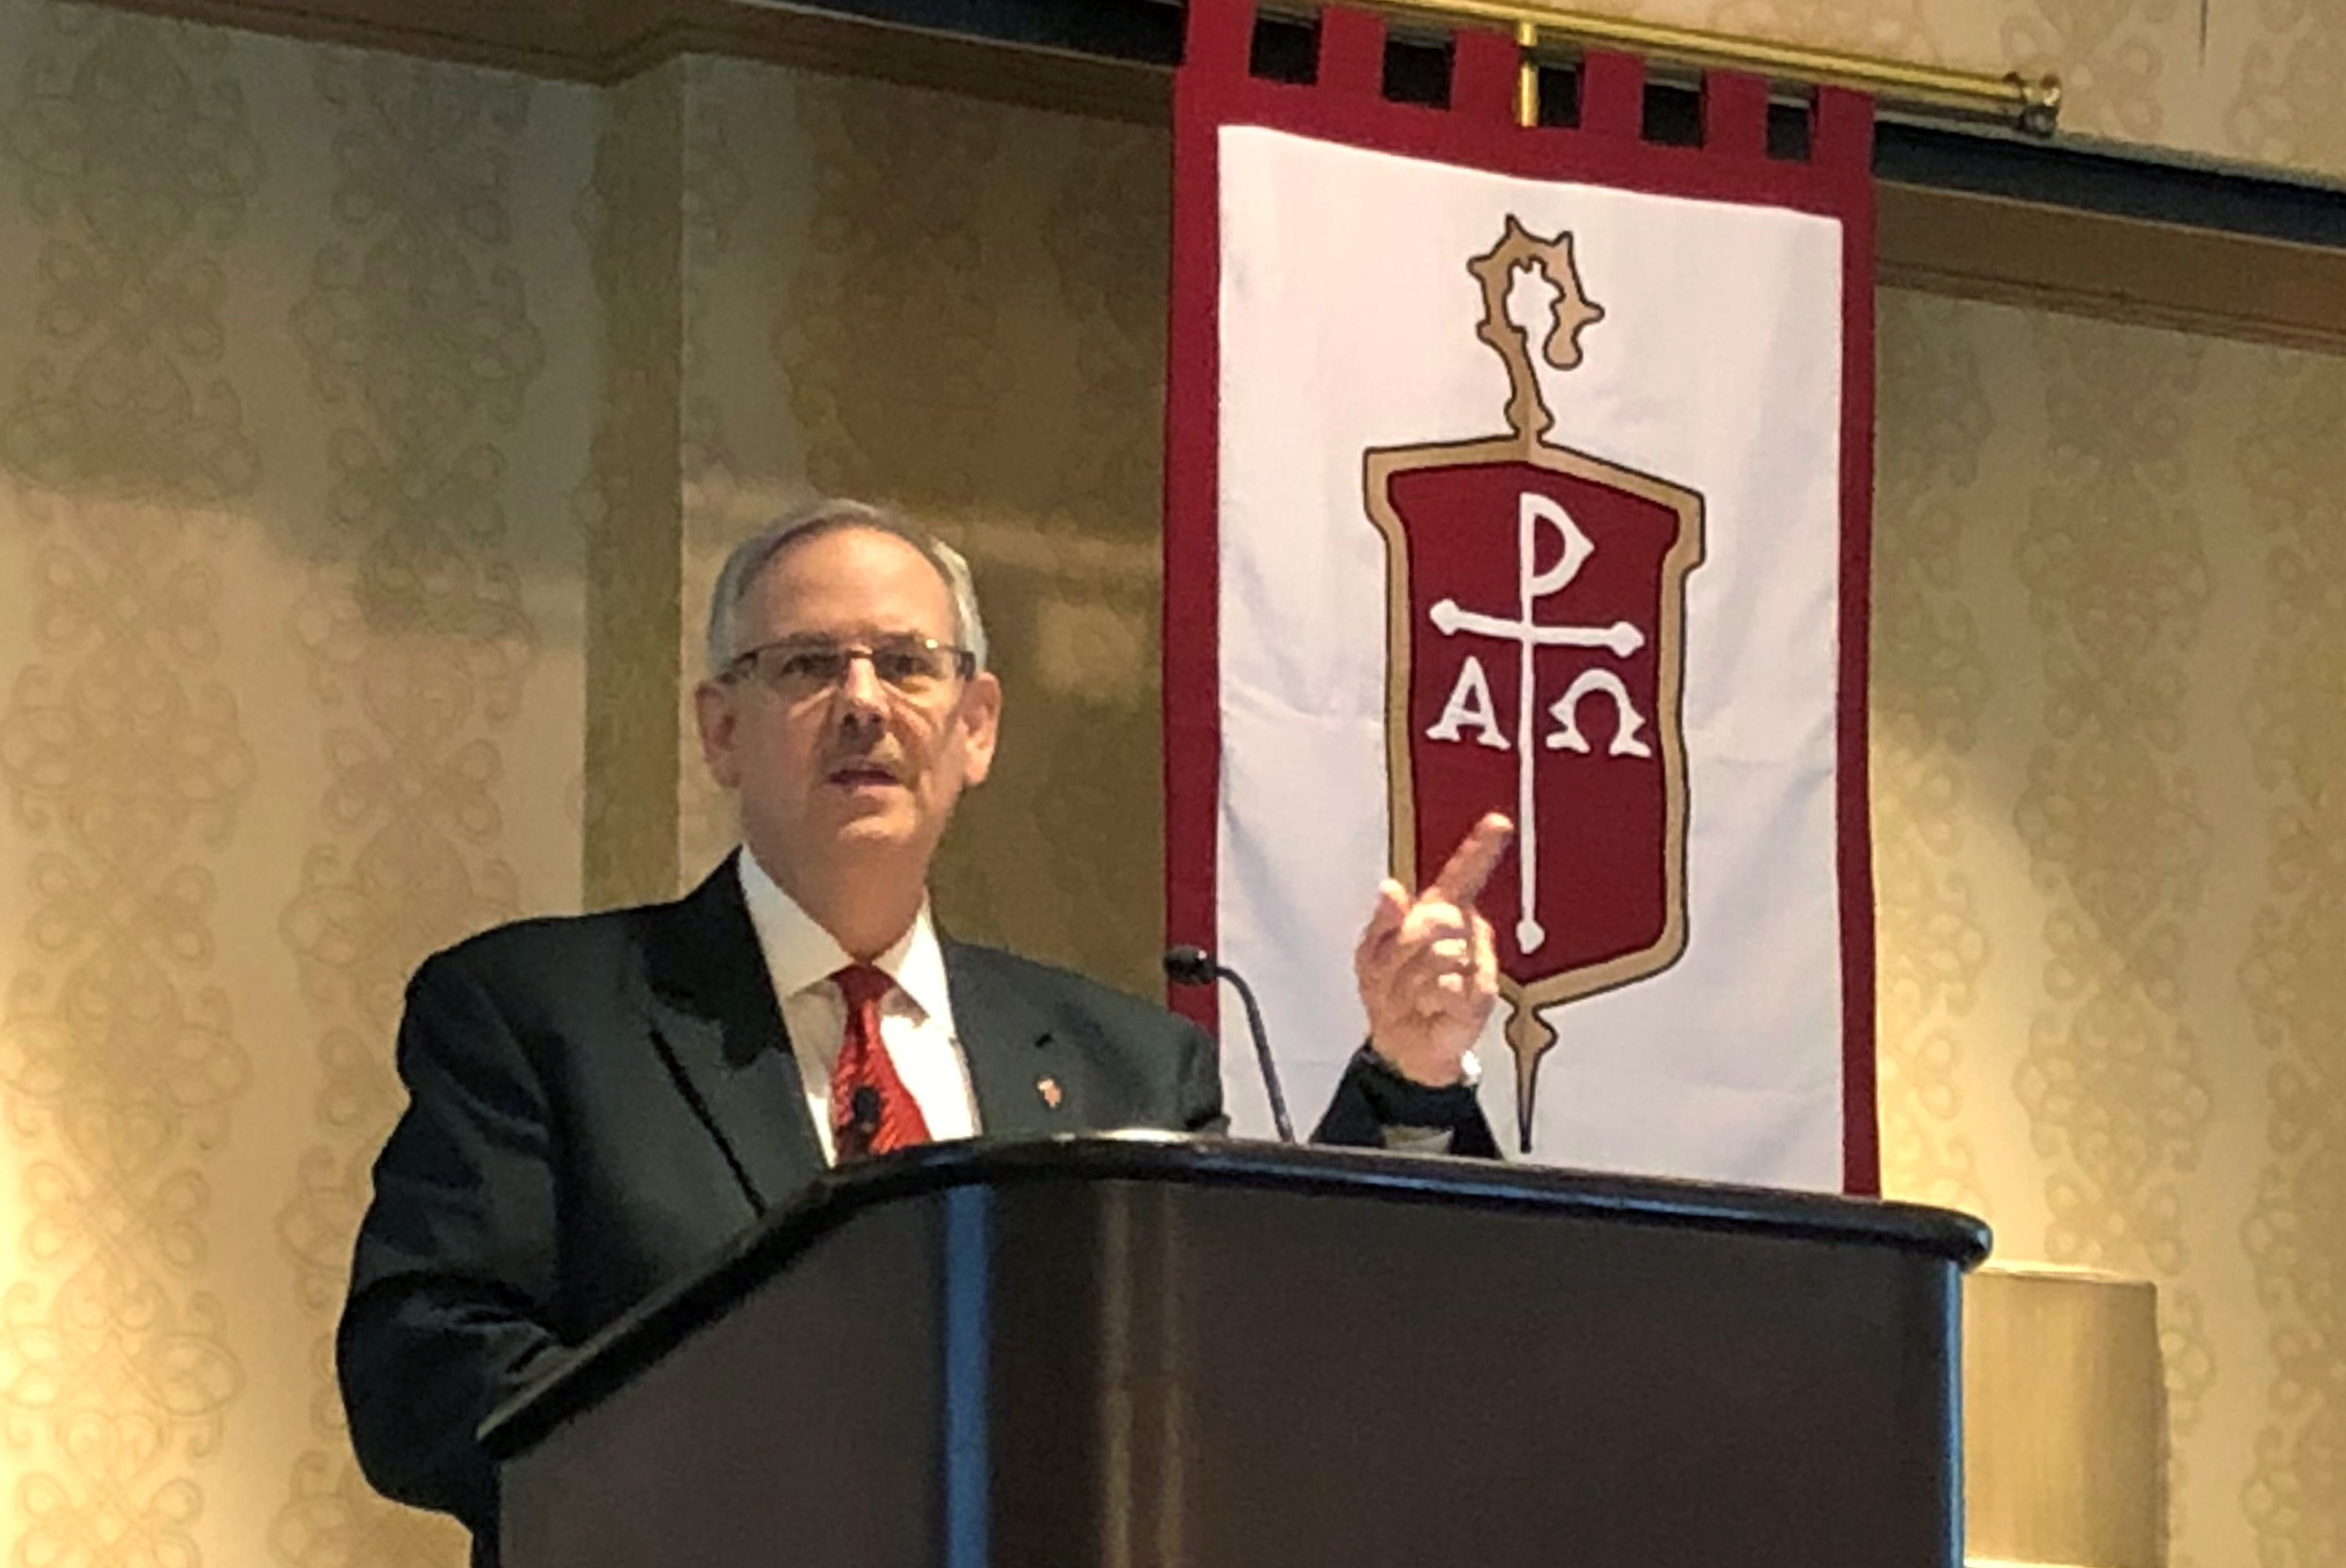 Bishop Bruce R. Ough gives his address April 29 at the spring 2018 meeting of the Council of Bishops in Chicago. Photo by Anne Marie Gerhardt, Northern Illinois Conference.